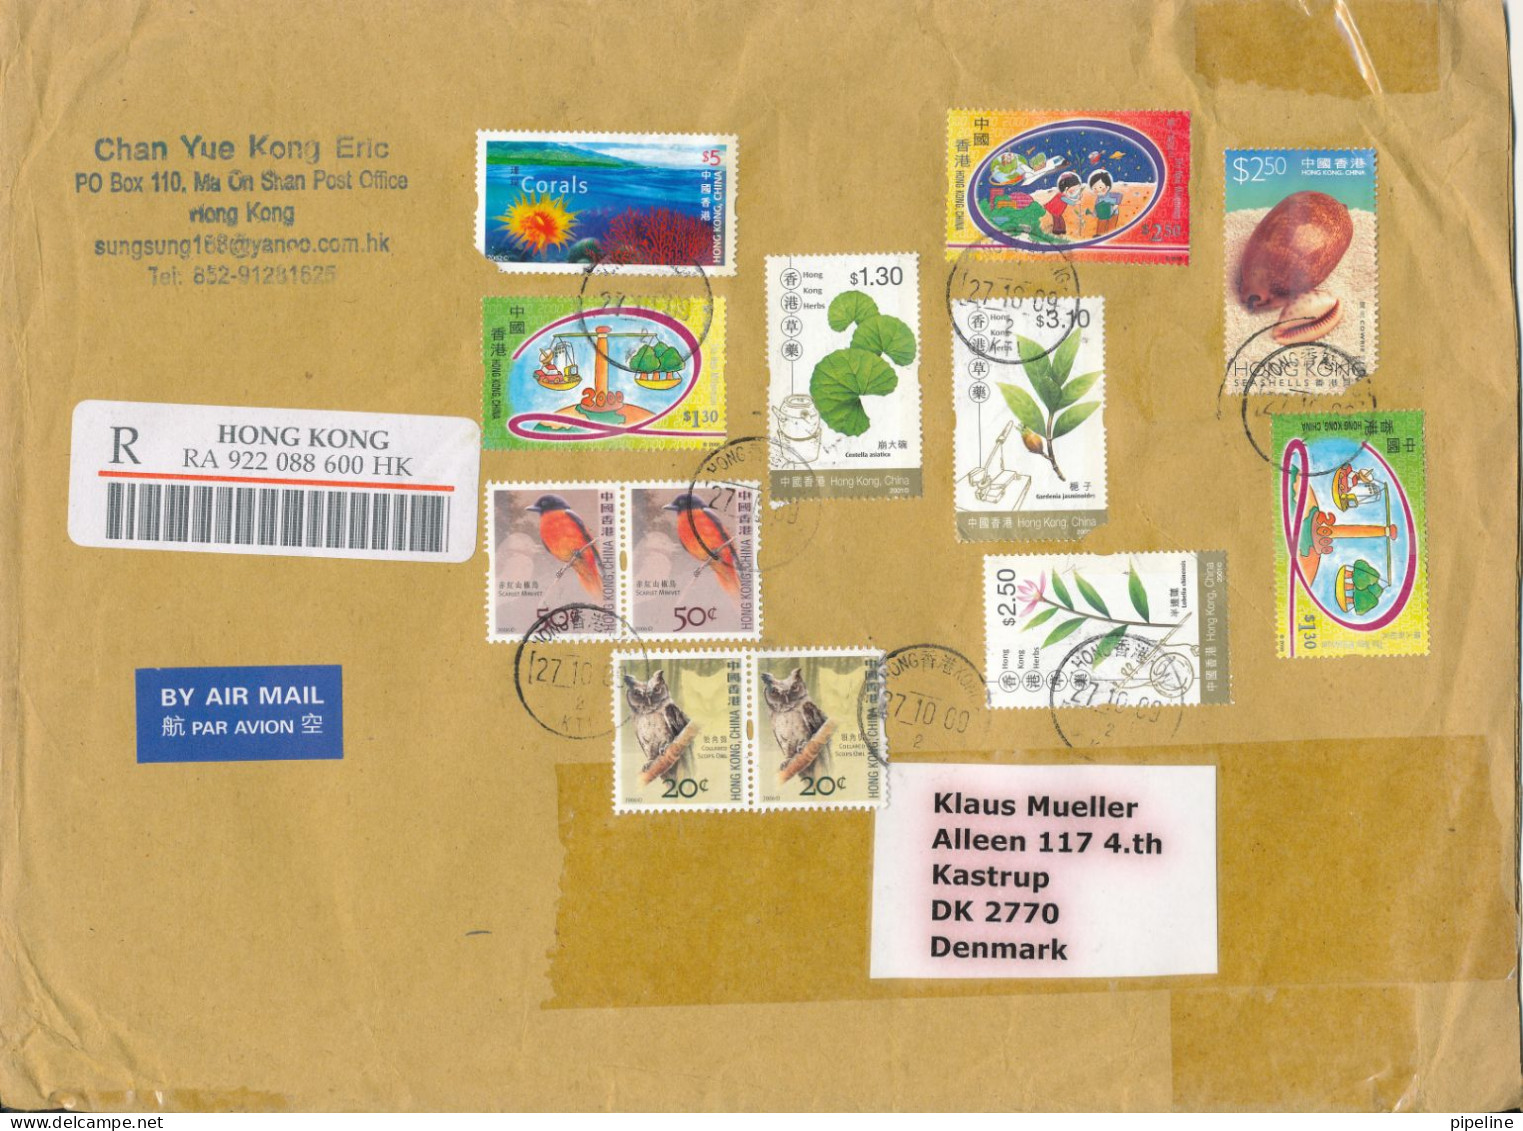 Hong Kong Registered Cover Sent Air Mail To Denmark 27-10-2009 Topic Stamps Big Size Cover 2 Stamps Are Damaged - Cartas & Documentos